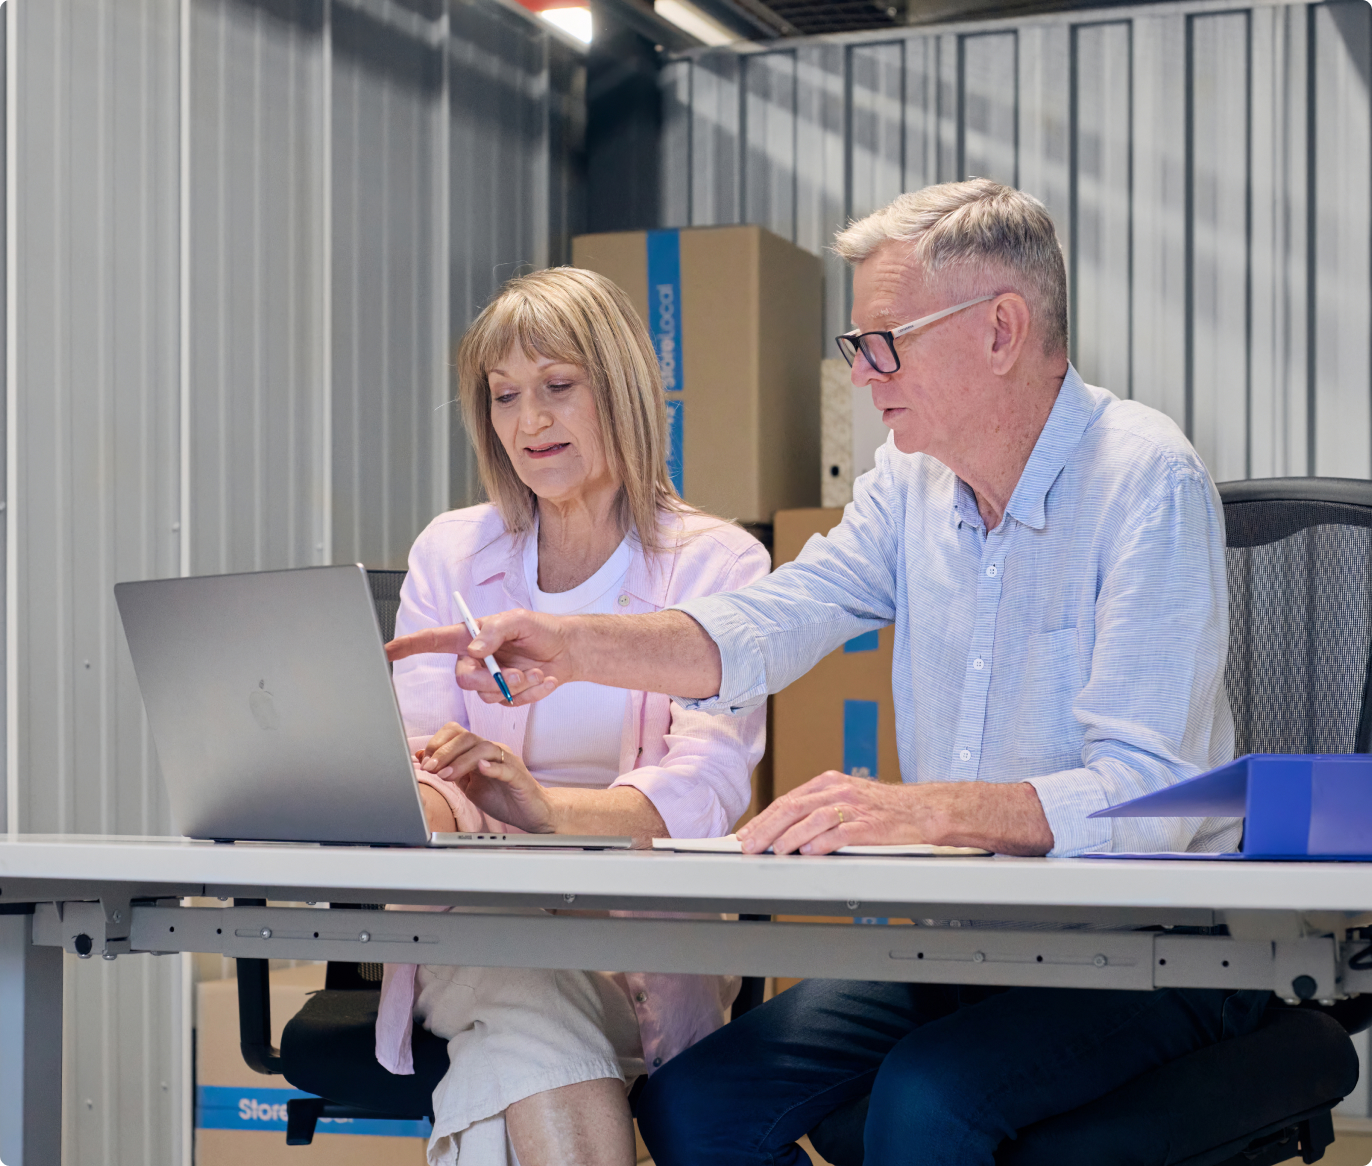 A man and woman looking at a laptop in a storage unit.